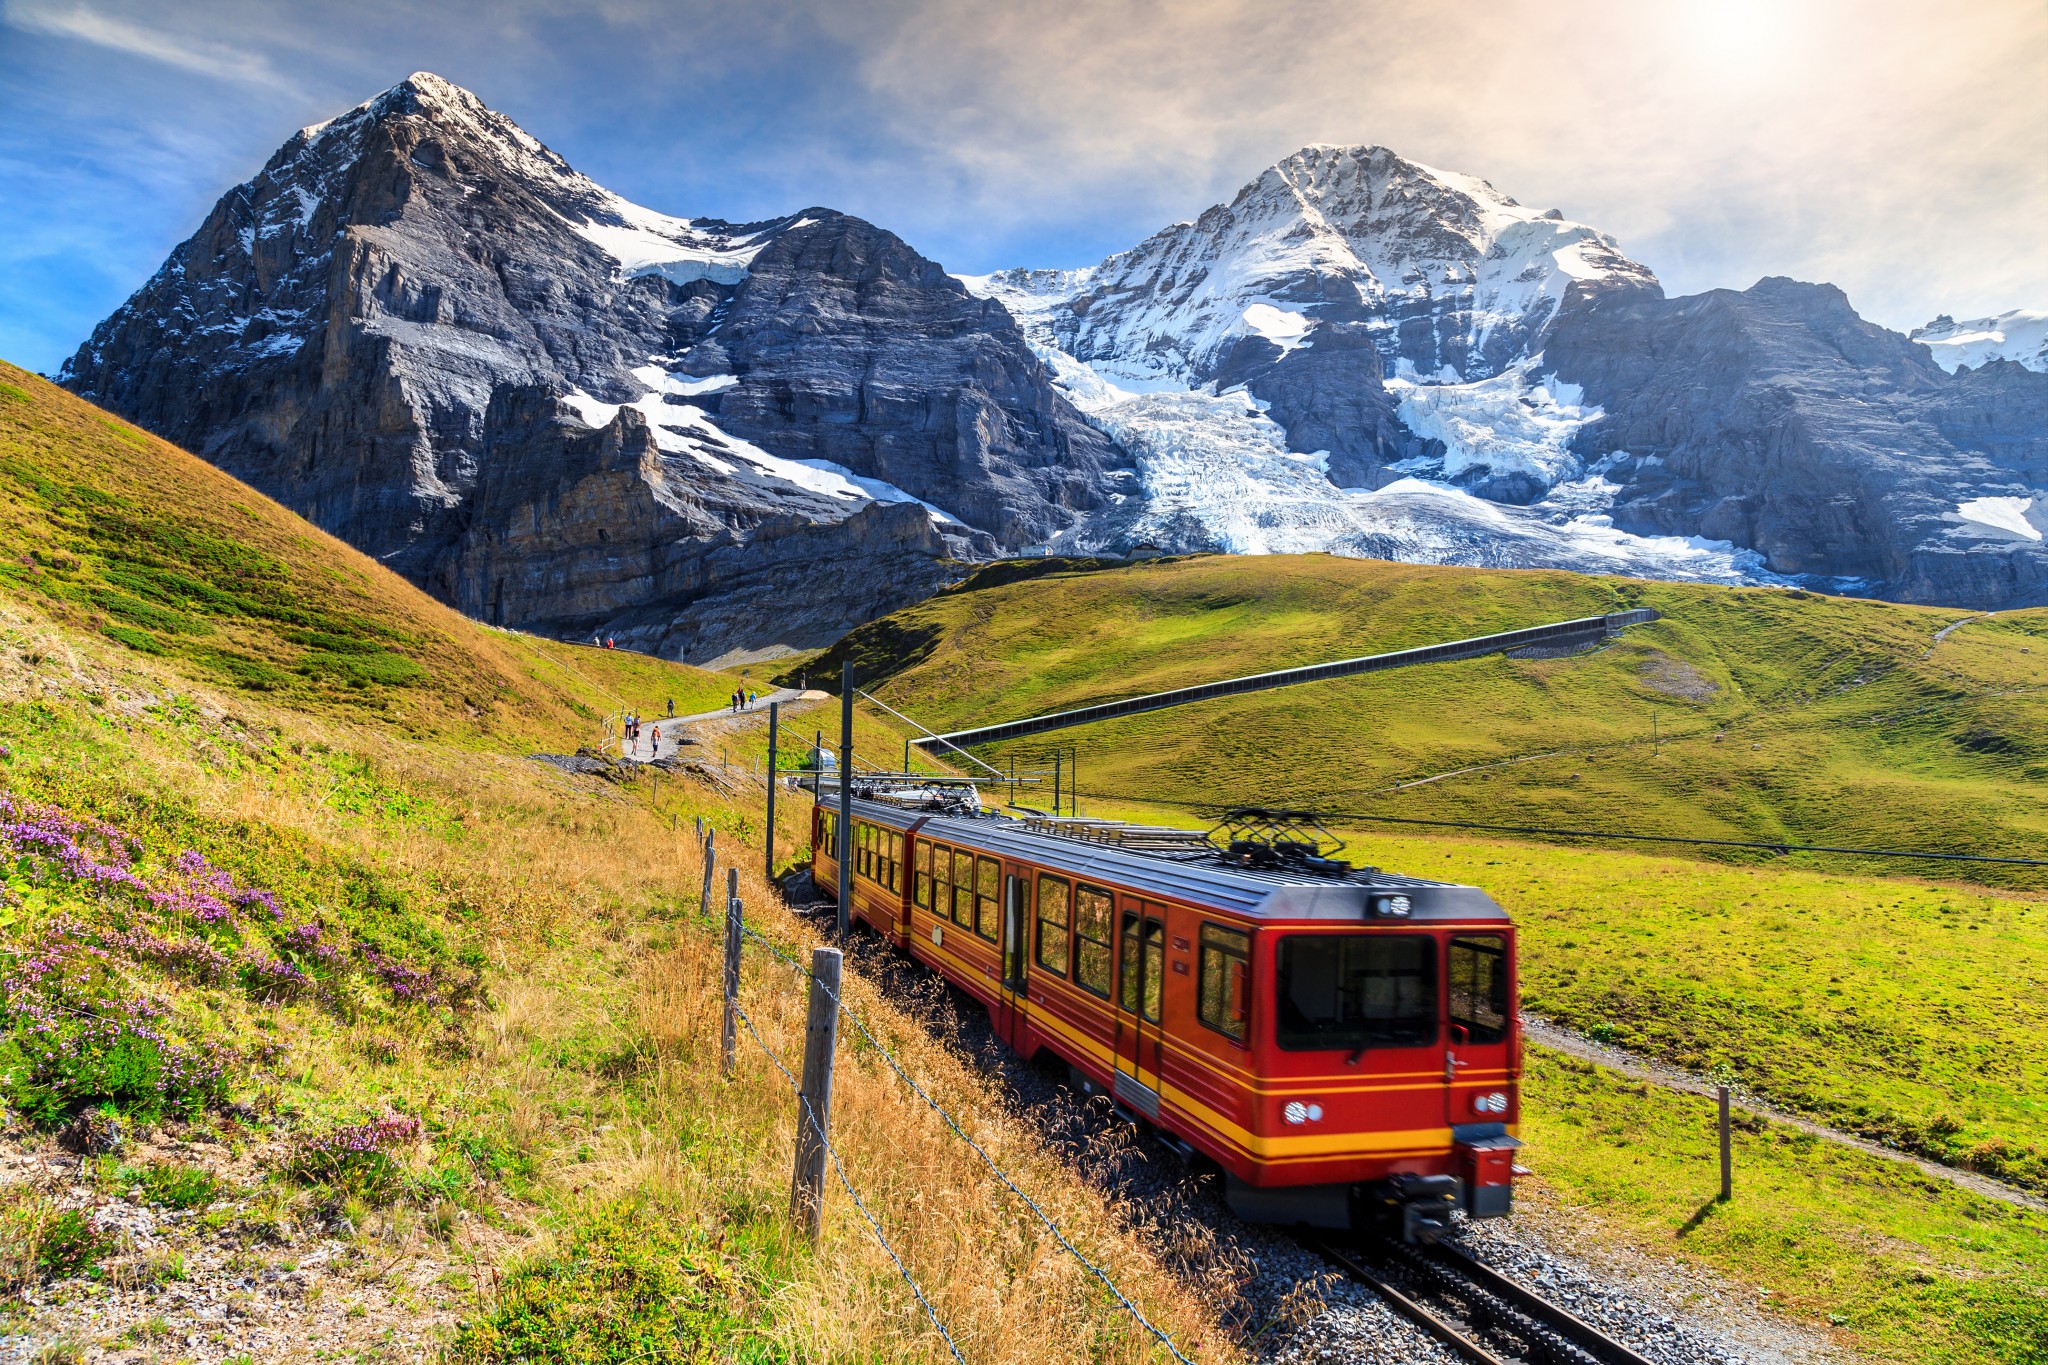 The Ultimate Guide to Saving Money with Eurail Passes